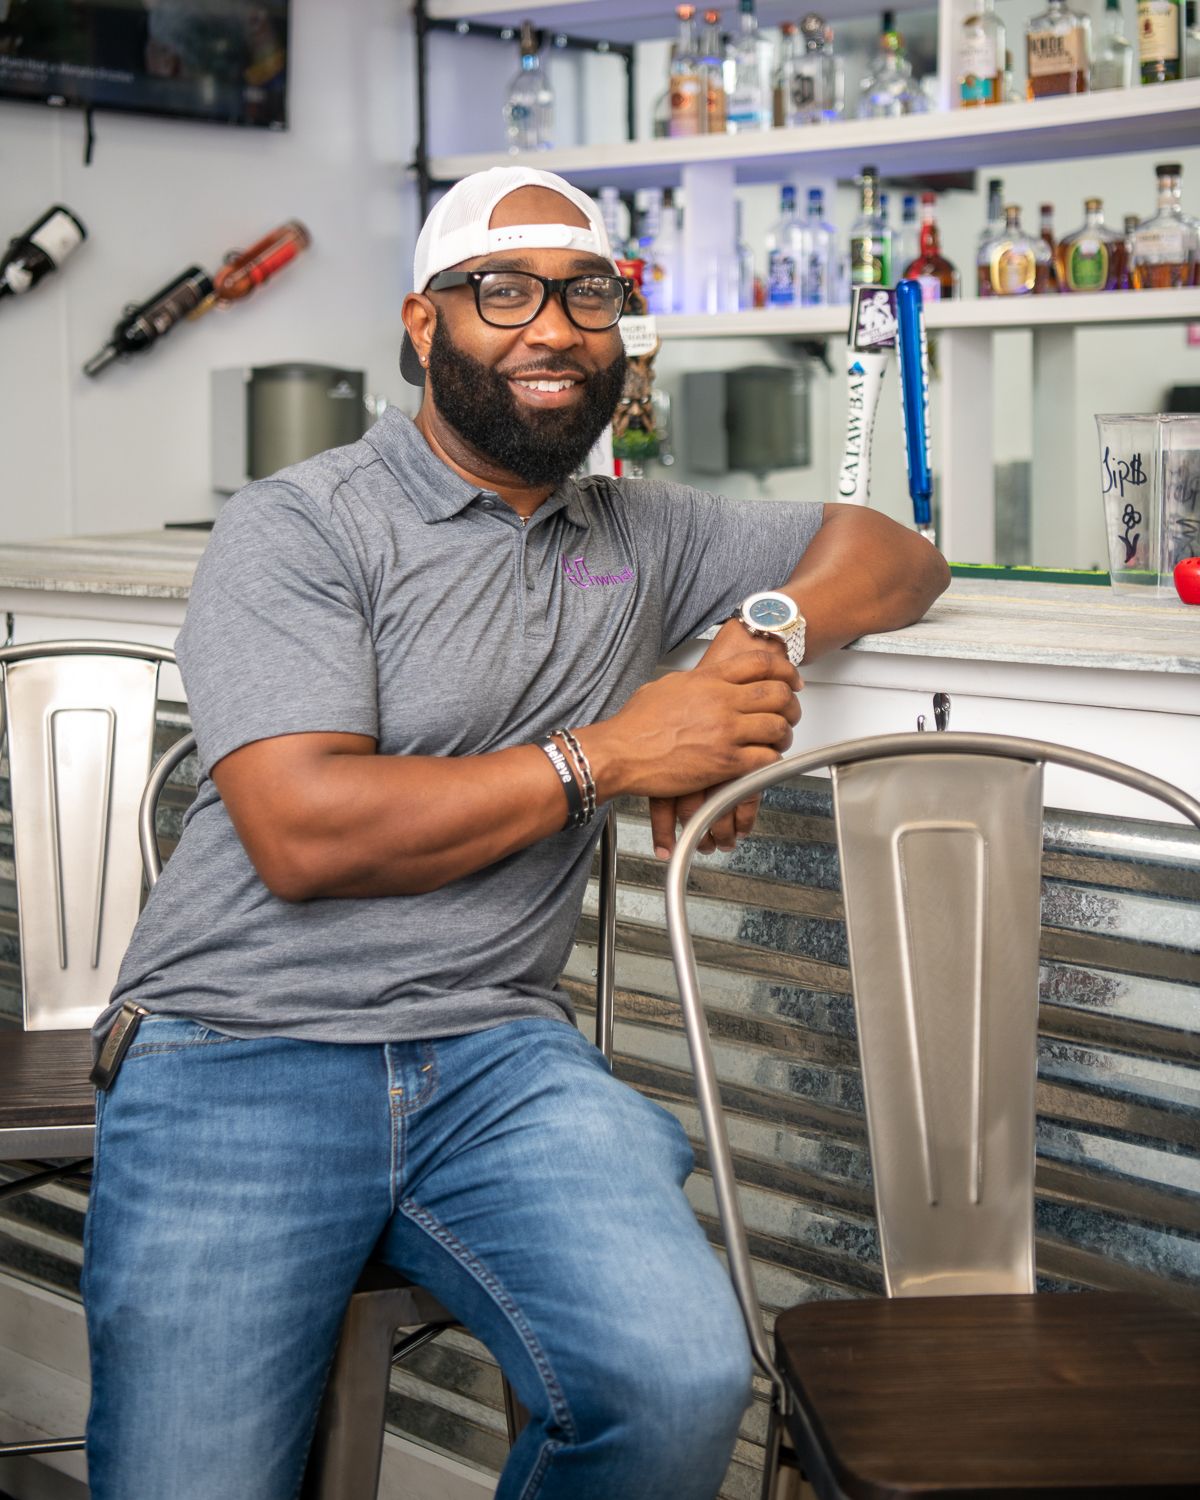 Anthony Anderson sits at the bar counter at Unwind on Main Cafe & Bar in High Point, NC